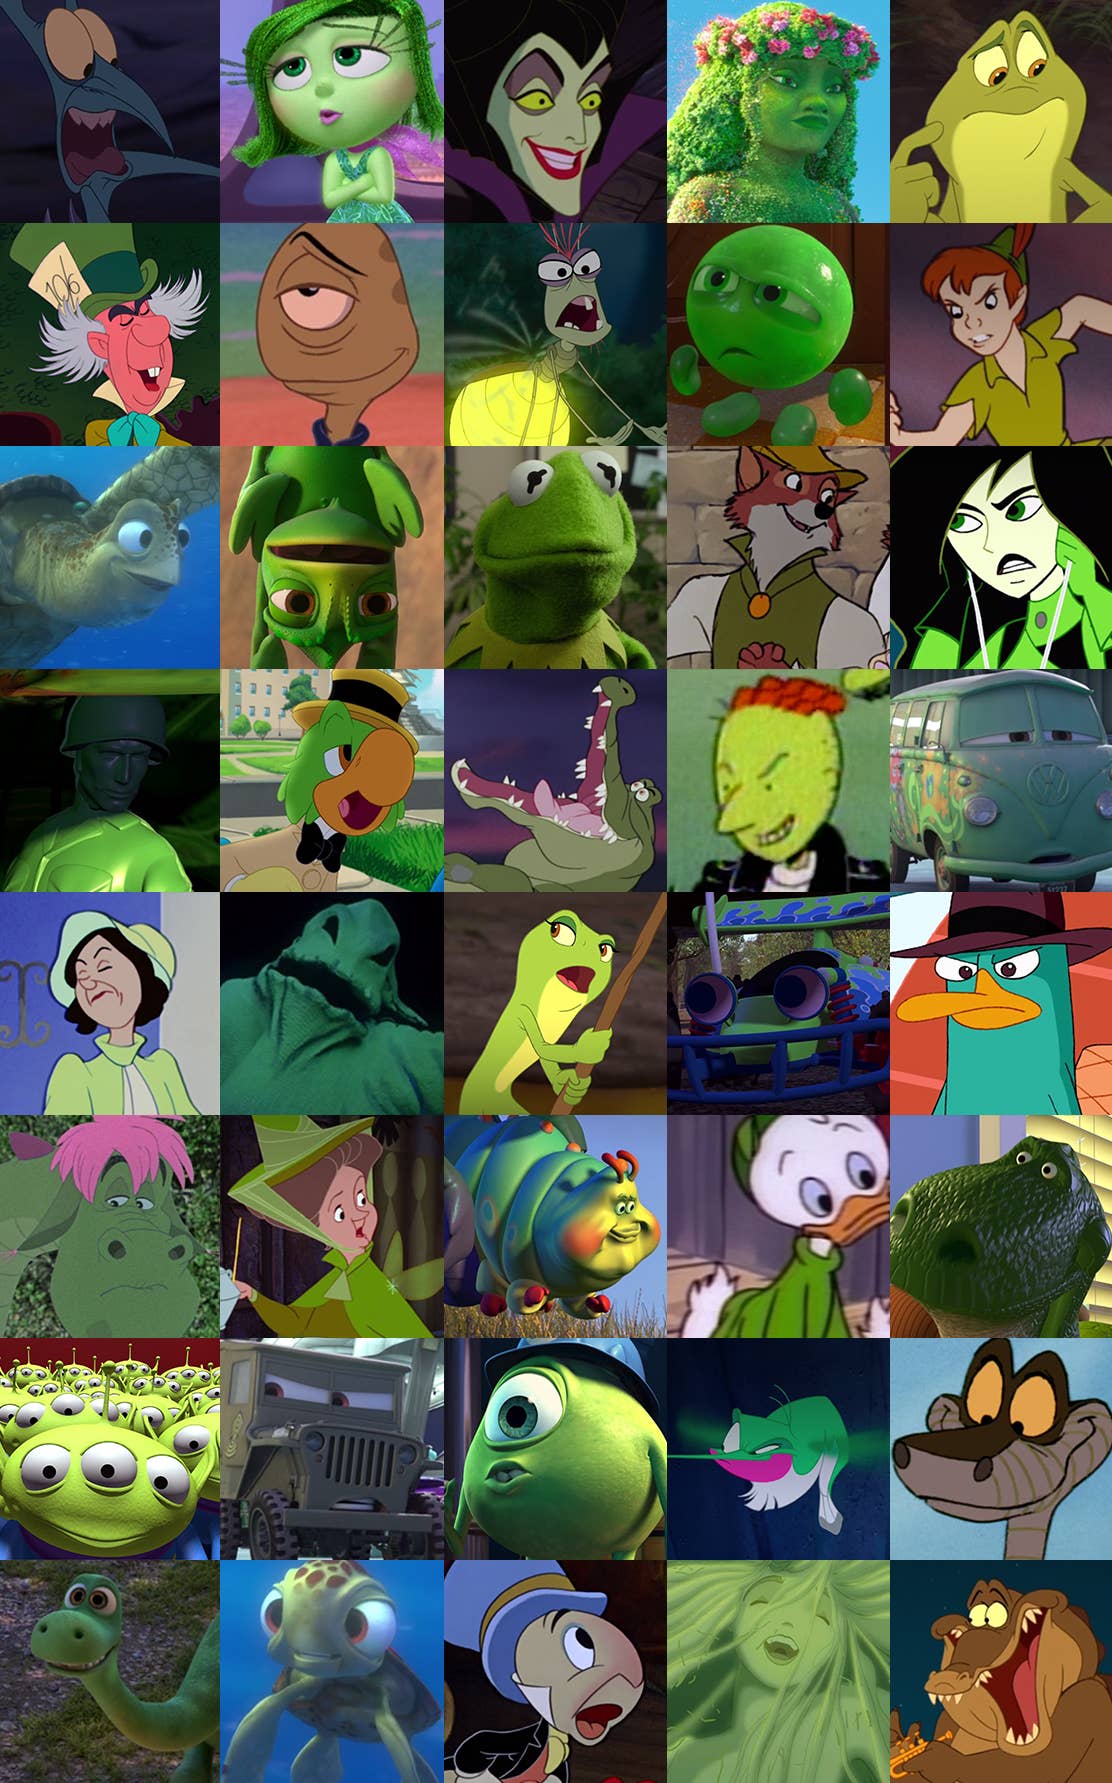 Can You Identify These Green Disney Characters